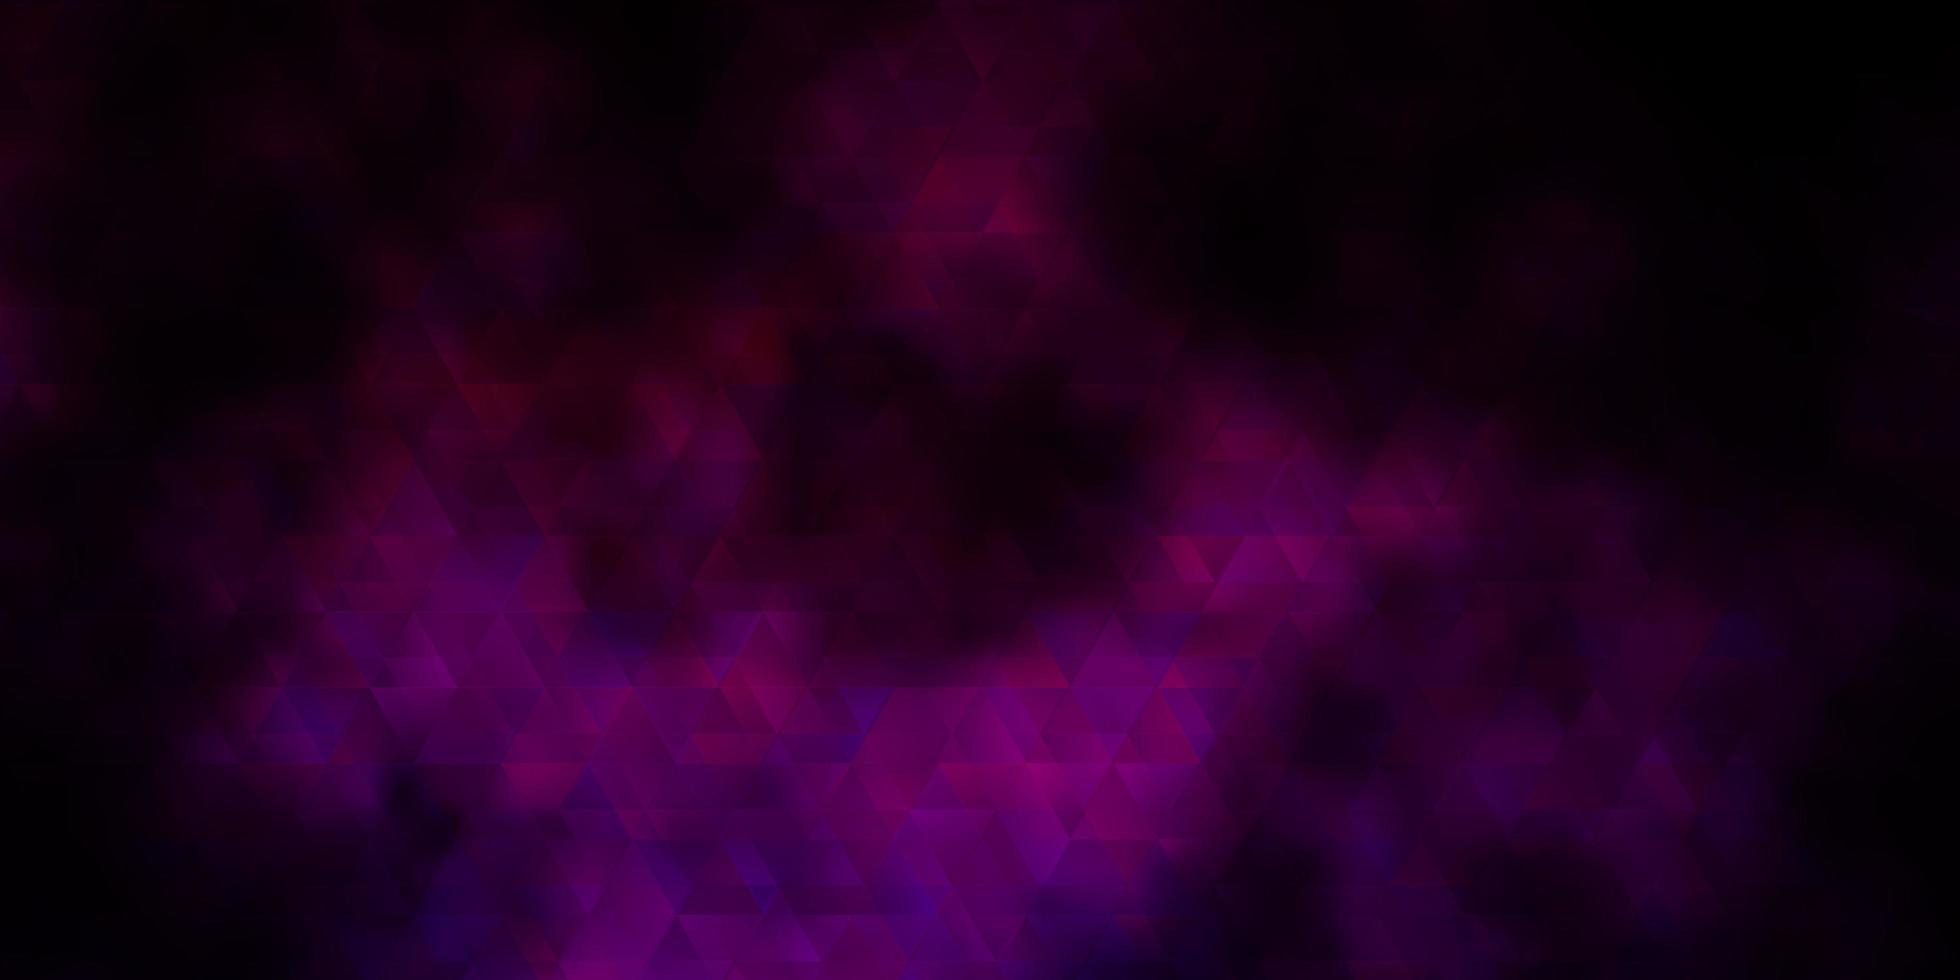 Dark Pink vector texture with lines, triangles.